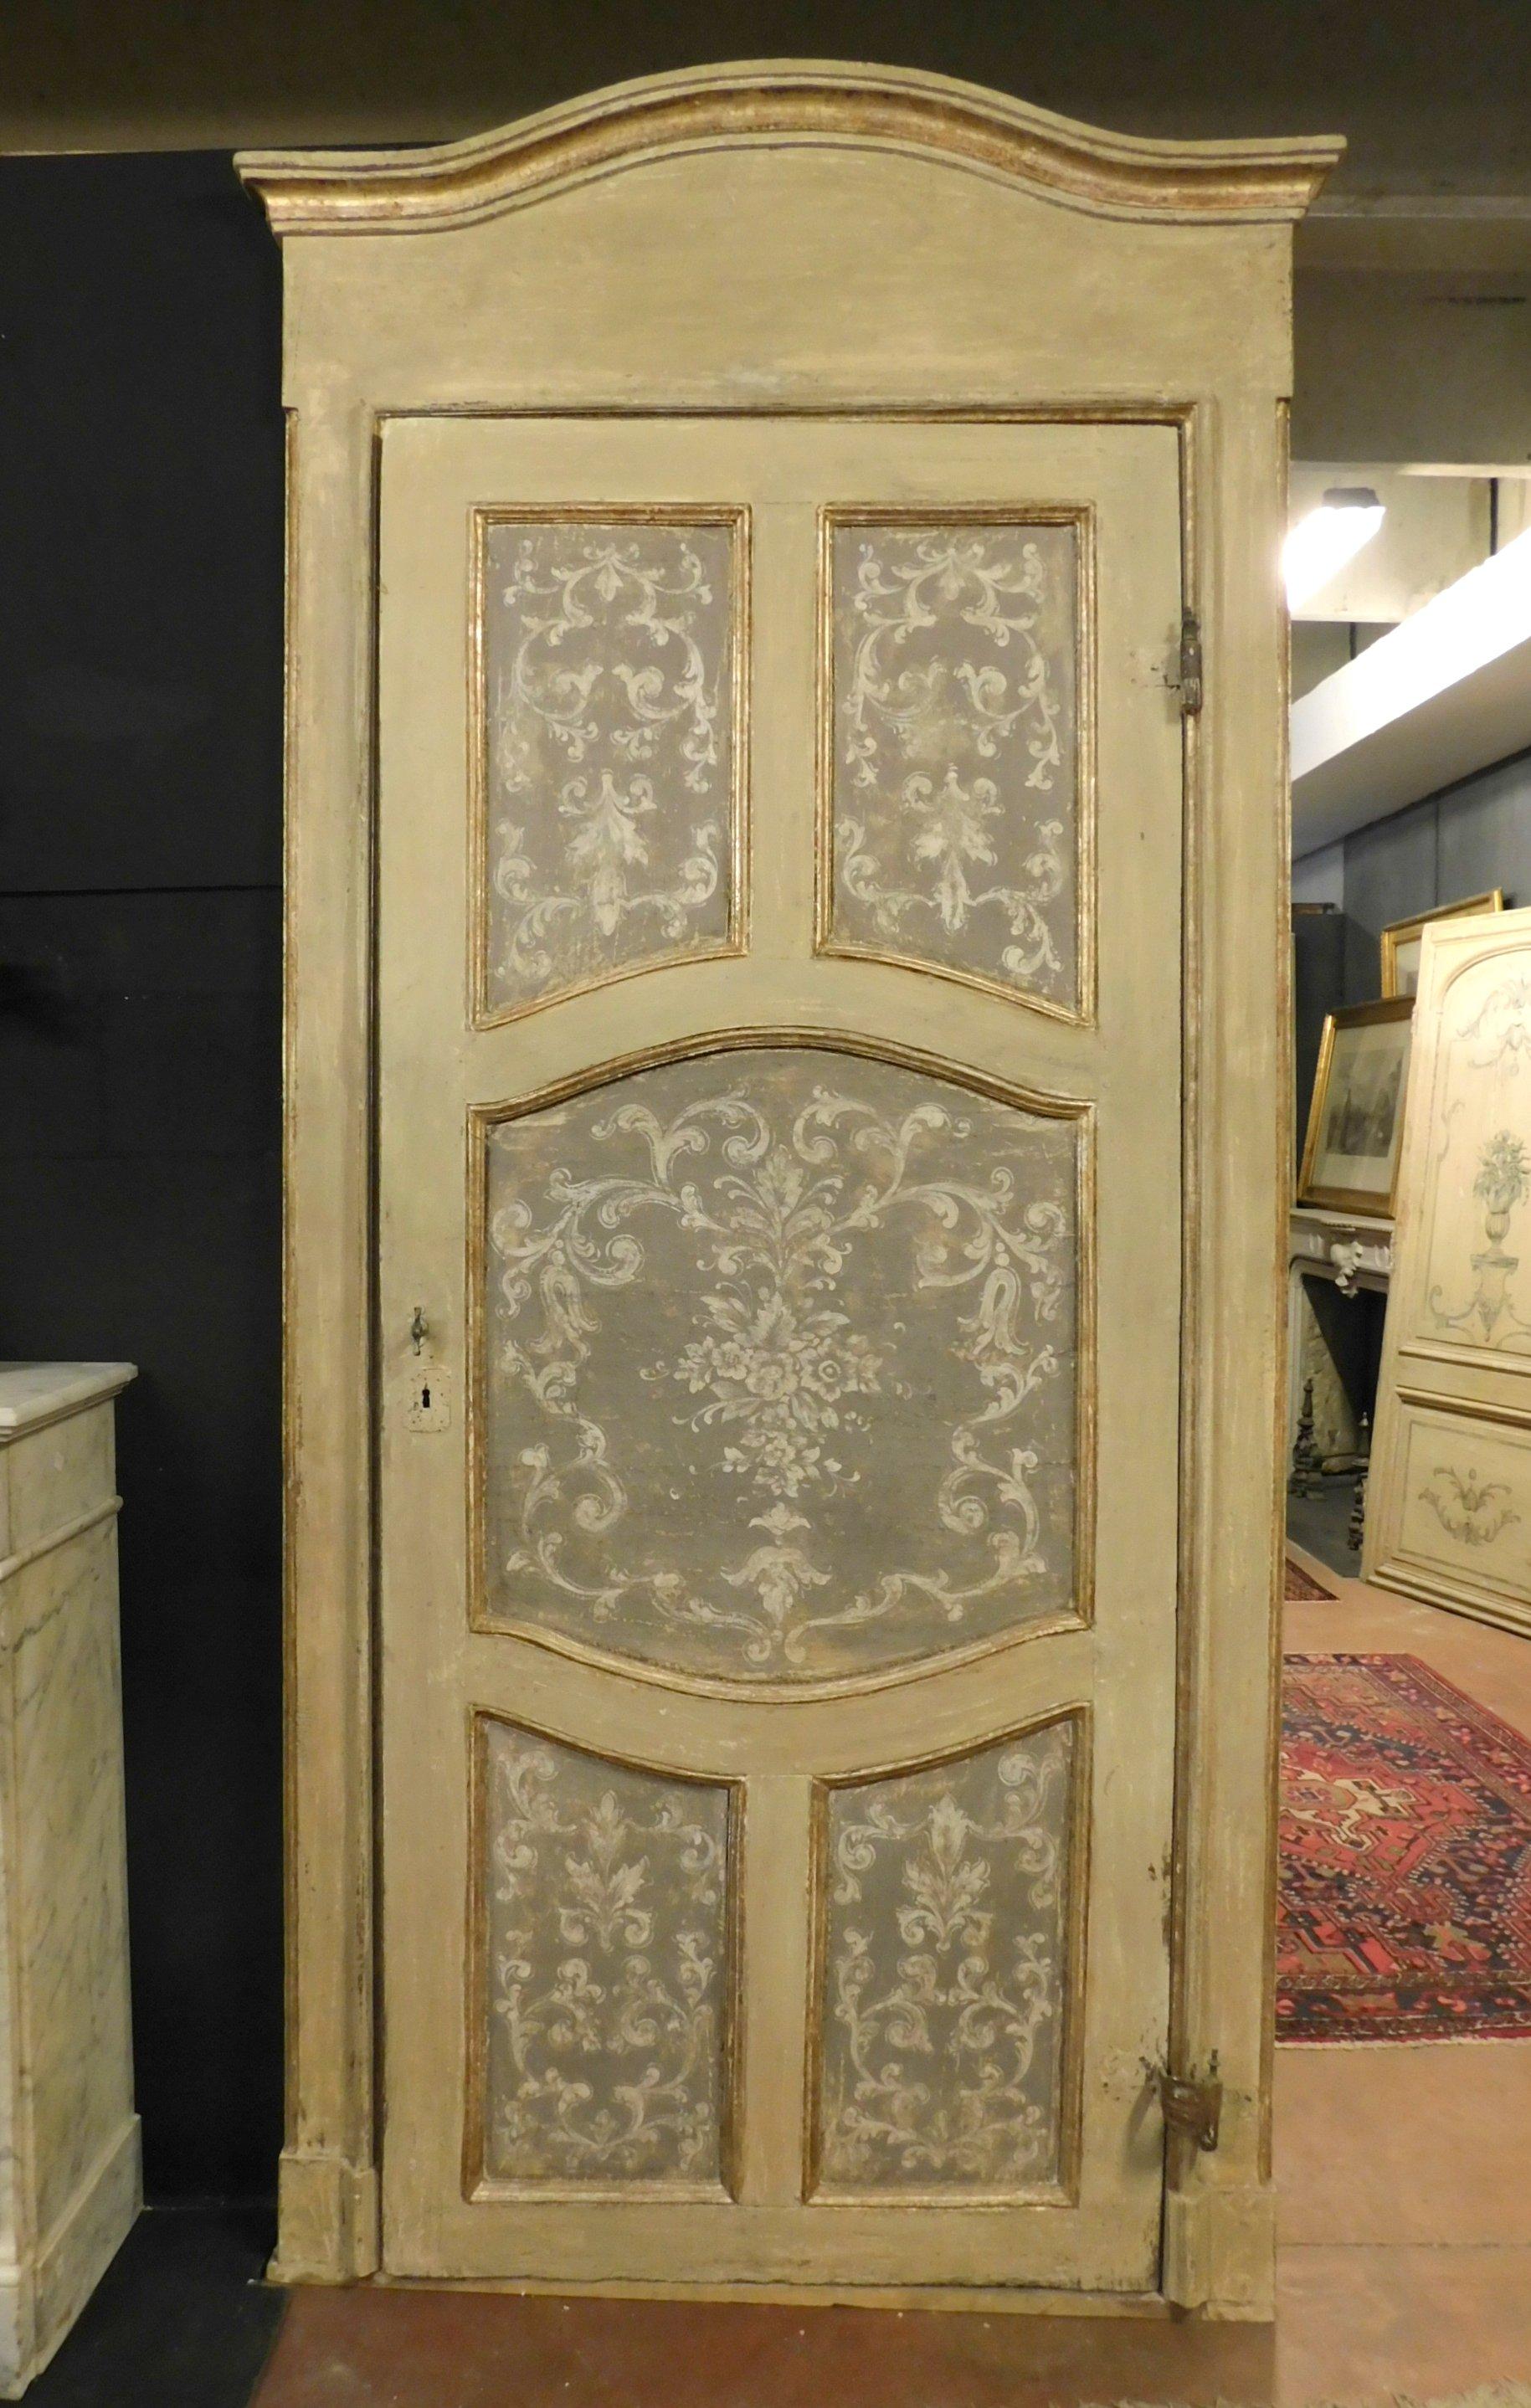 Antique lacquered door with white floral motifs on a gray background, 5 panels painted with gilded molure, original frame and iron, baroque period of the 1700 coming from an important noble palace in Italy.
Arched frame, also painted on the back